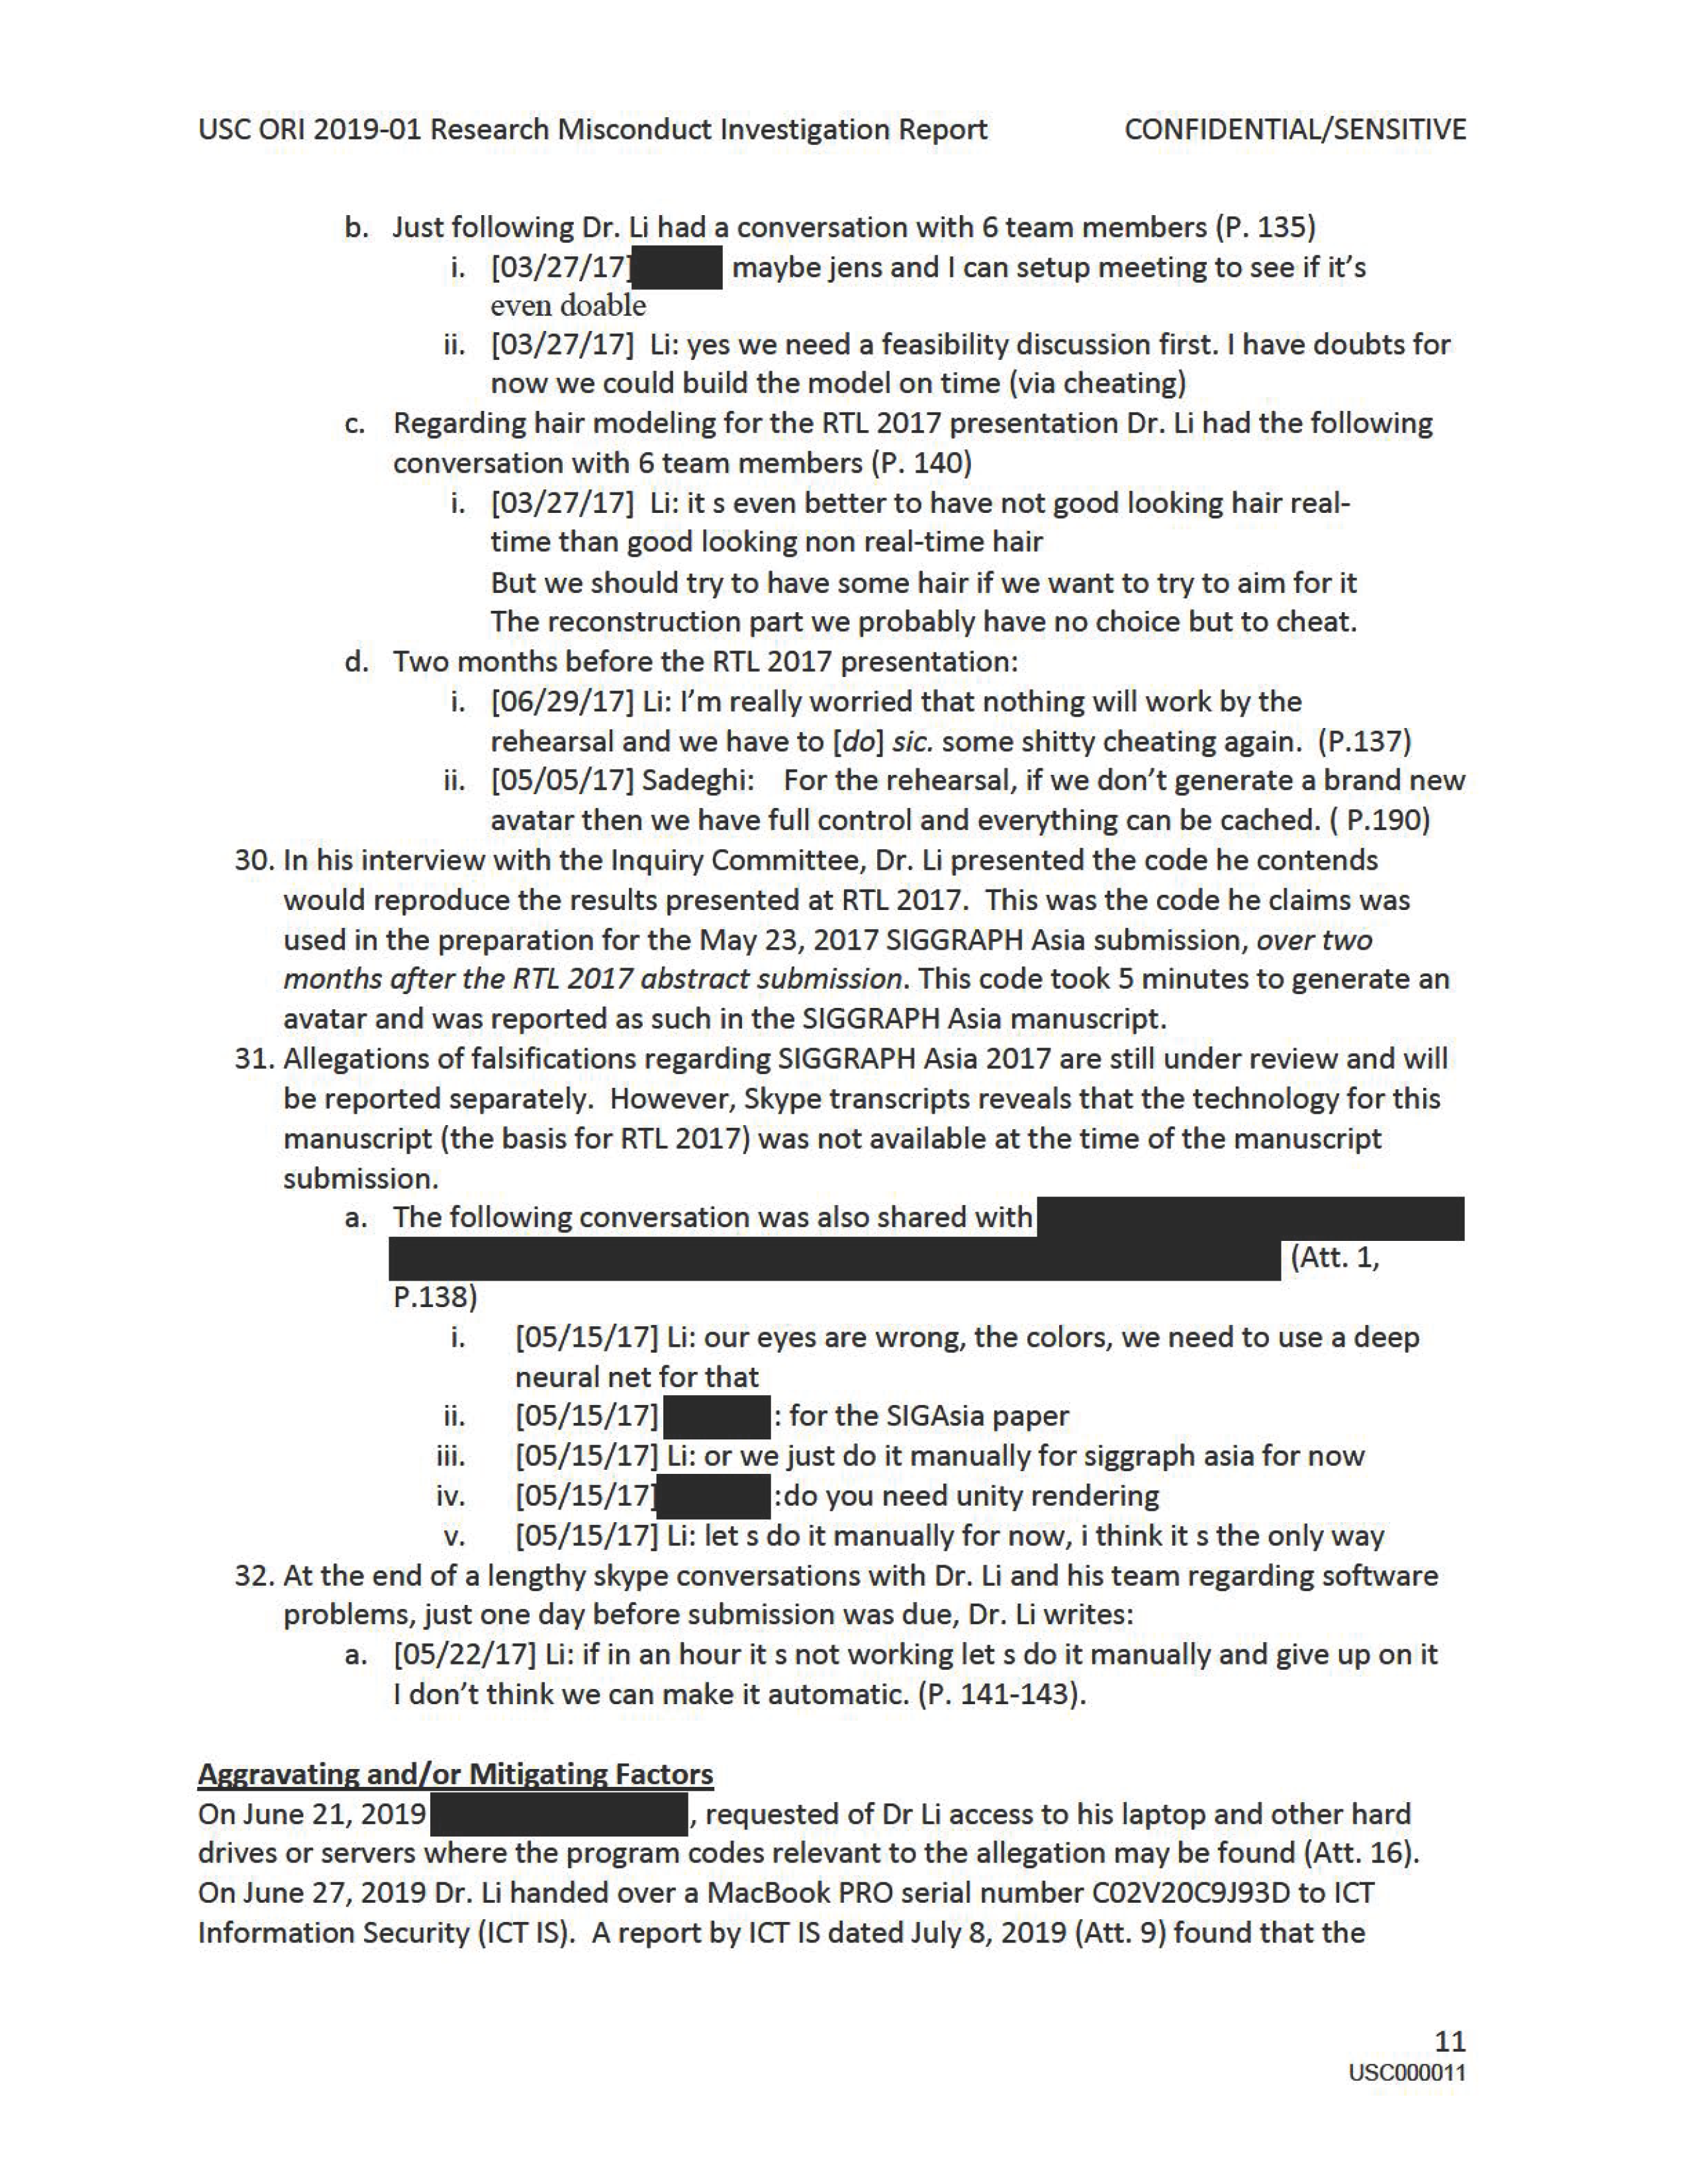 USC's Investigation Report re Hao Li's and Pinscreen's Scientific Misconduct at ACM SIGGRAPH RTL 2017 [Summary] Page 13